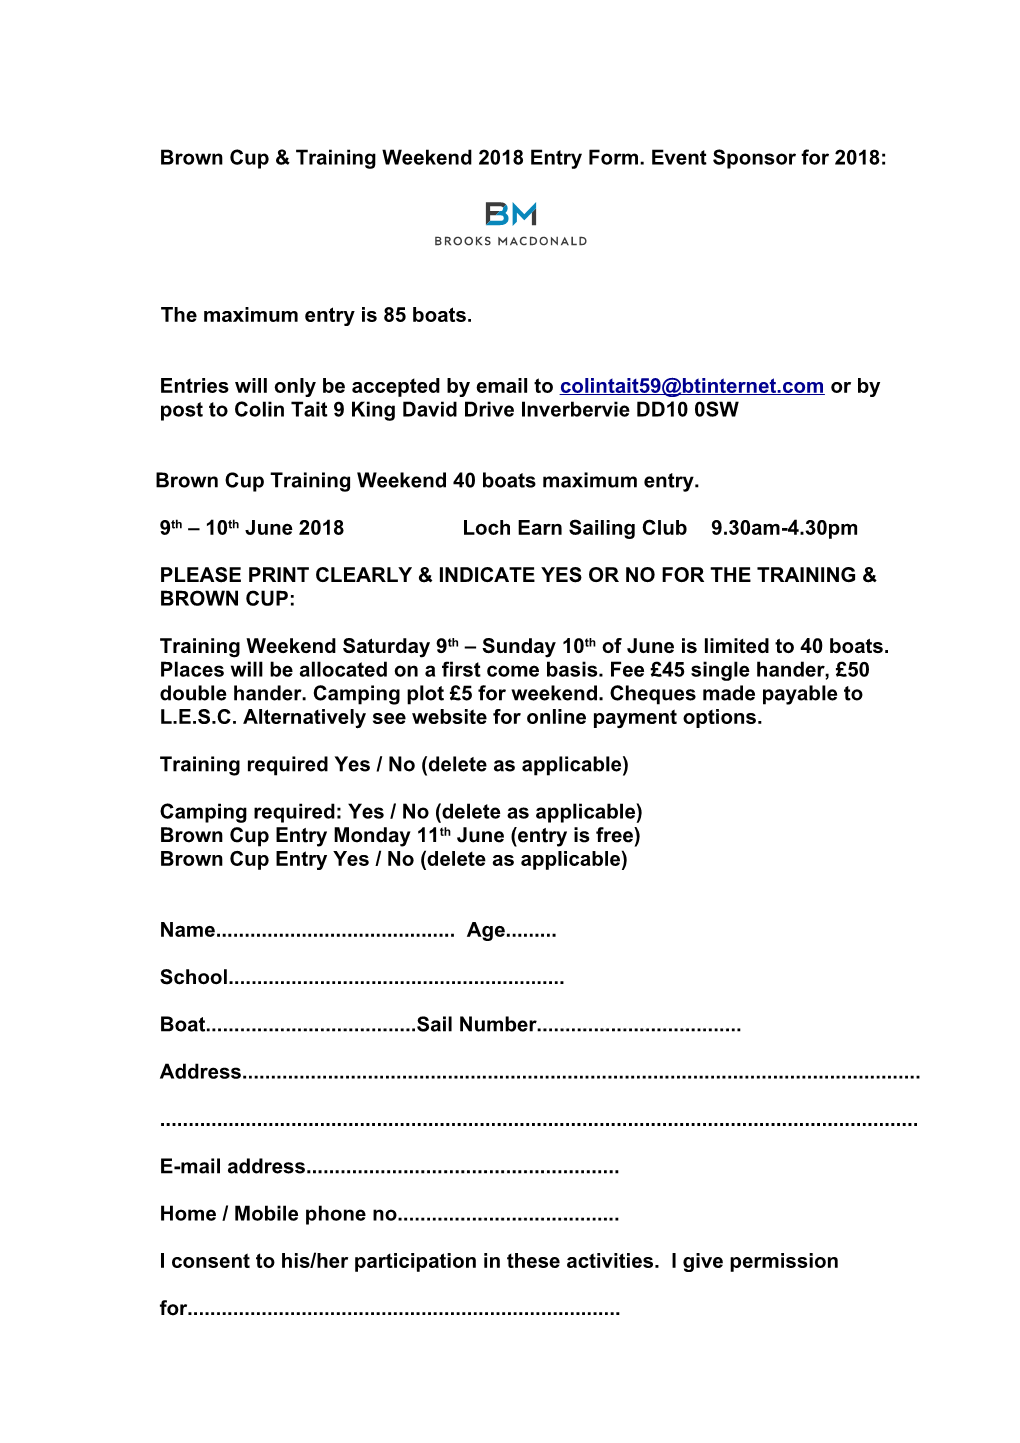 Brown Cup & Training Weekend 2018 Entry Form. Event Sponsor for 2018